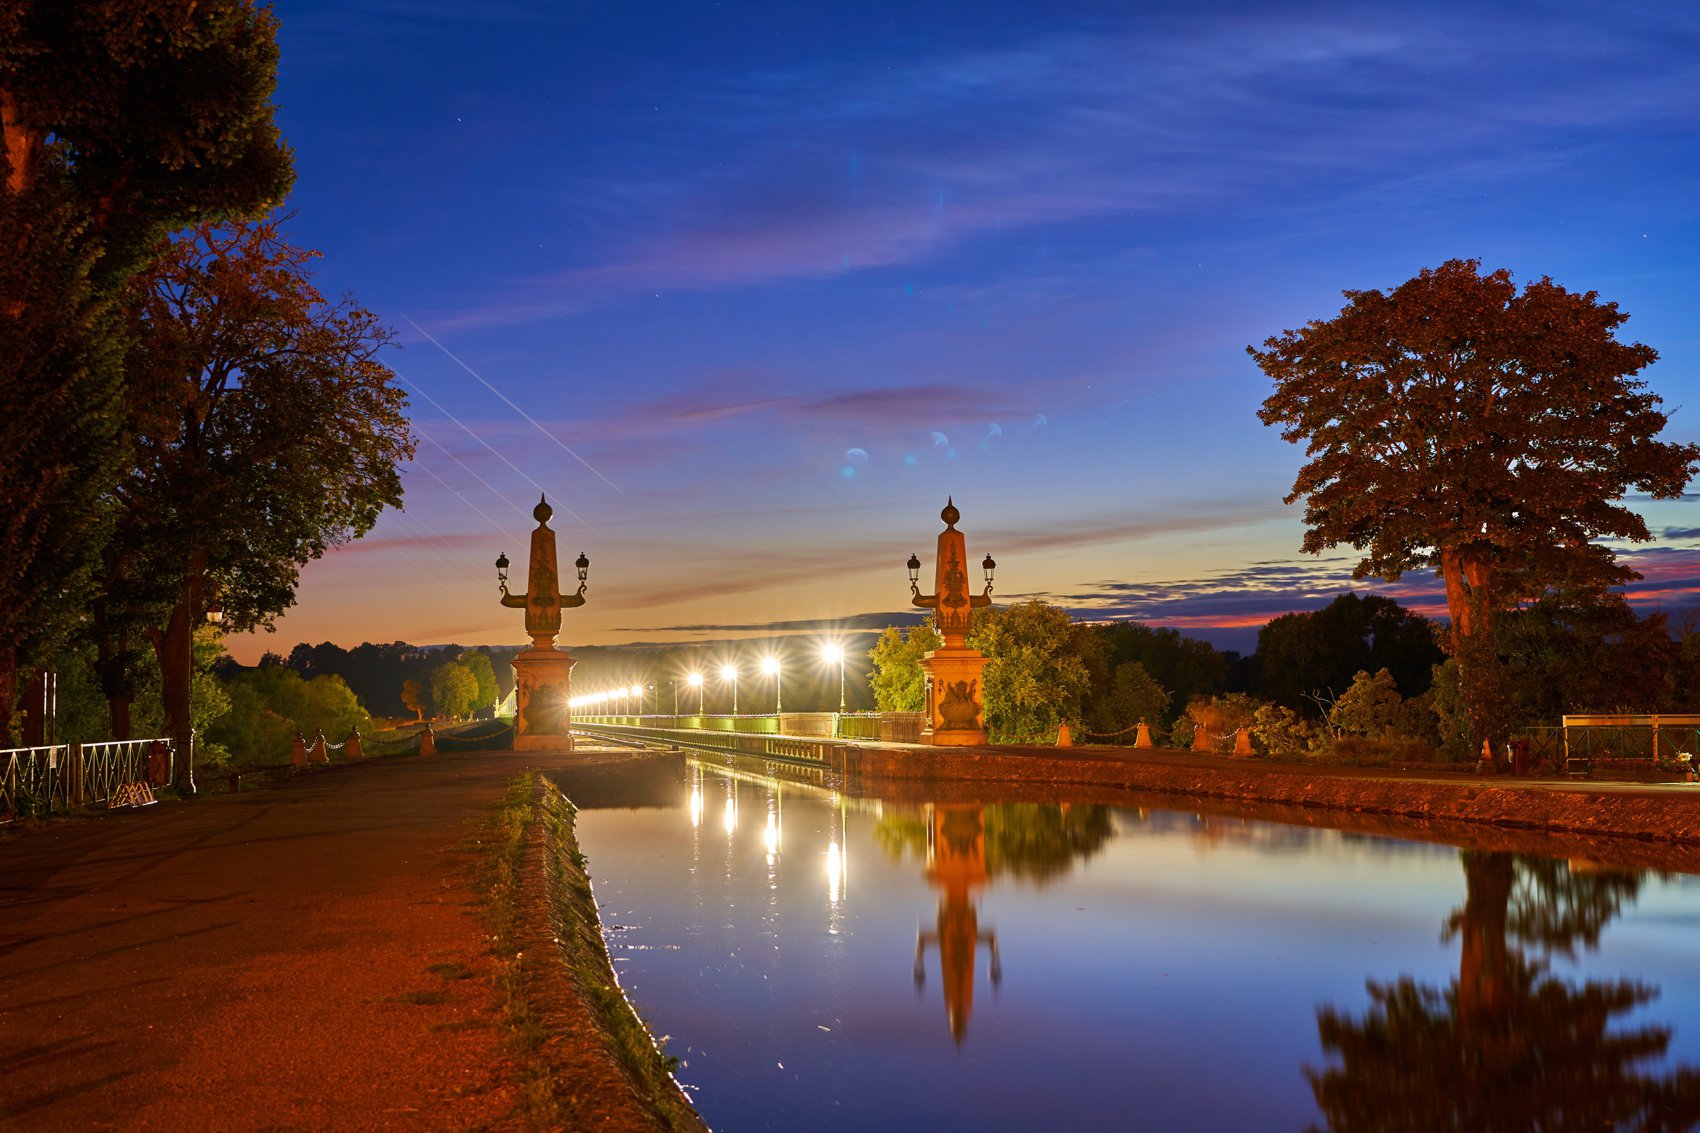 Hero Image forBriare-le-Canal, Loiret, France in Sept 2020